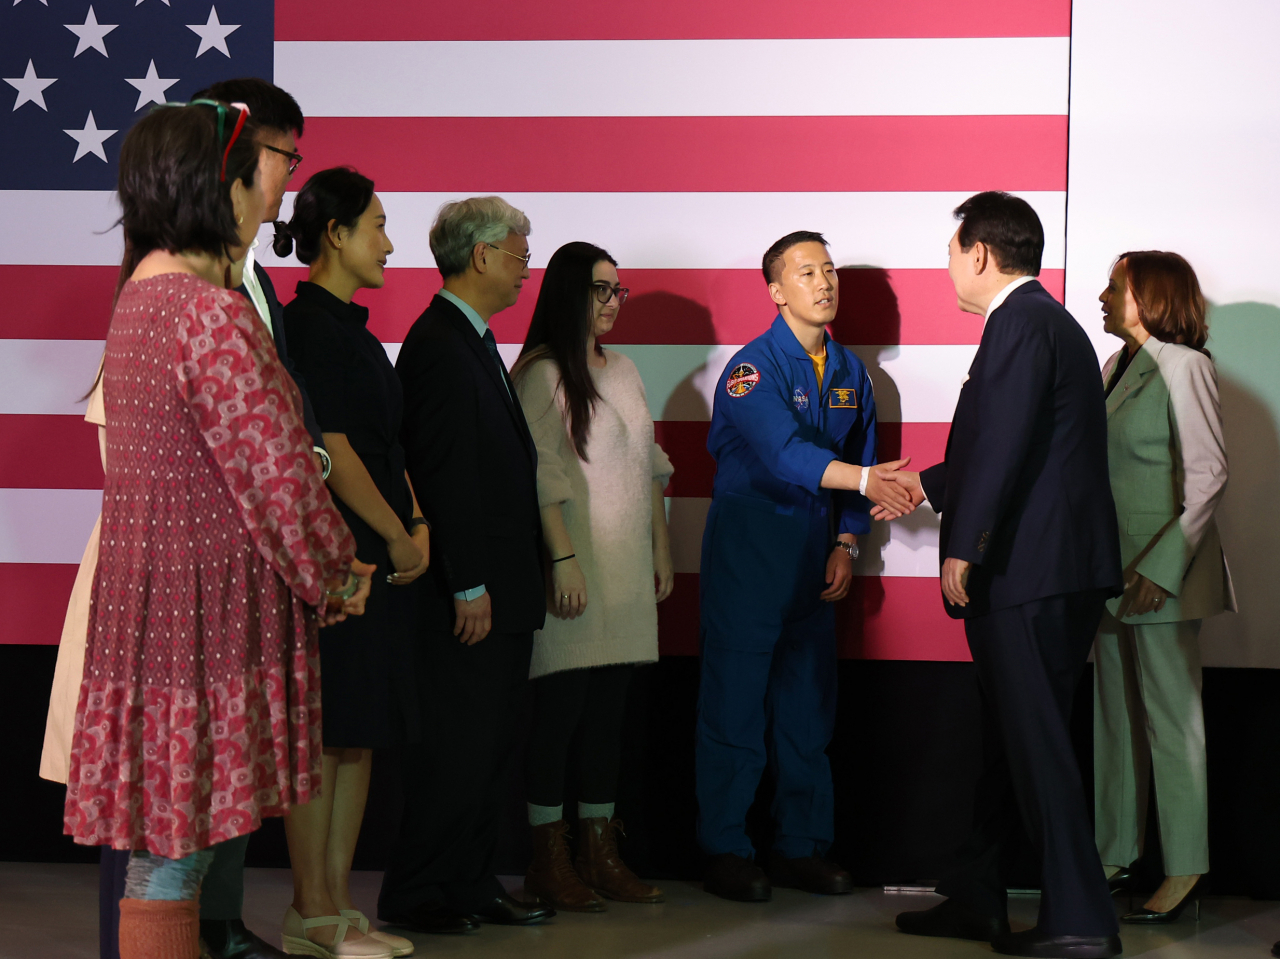 President Yoon Suk Yeol (second from right) shakes hands with Jonny Kim, a Korean-American NASA astronaut, during his visit to the Goddard Space Flight Center in Greenbelt, Maryland on Tuesday. (Yonhap)